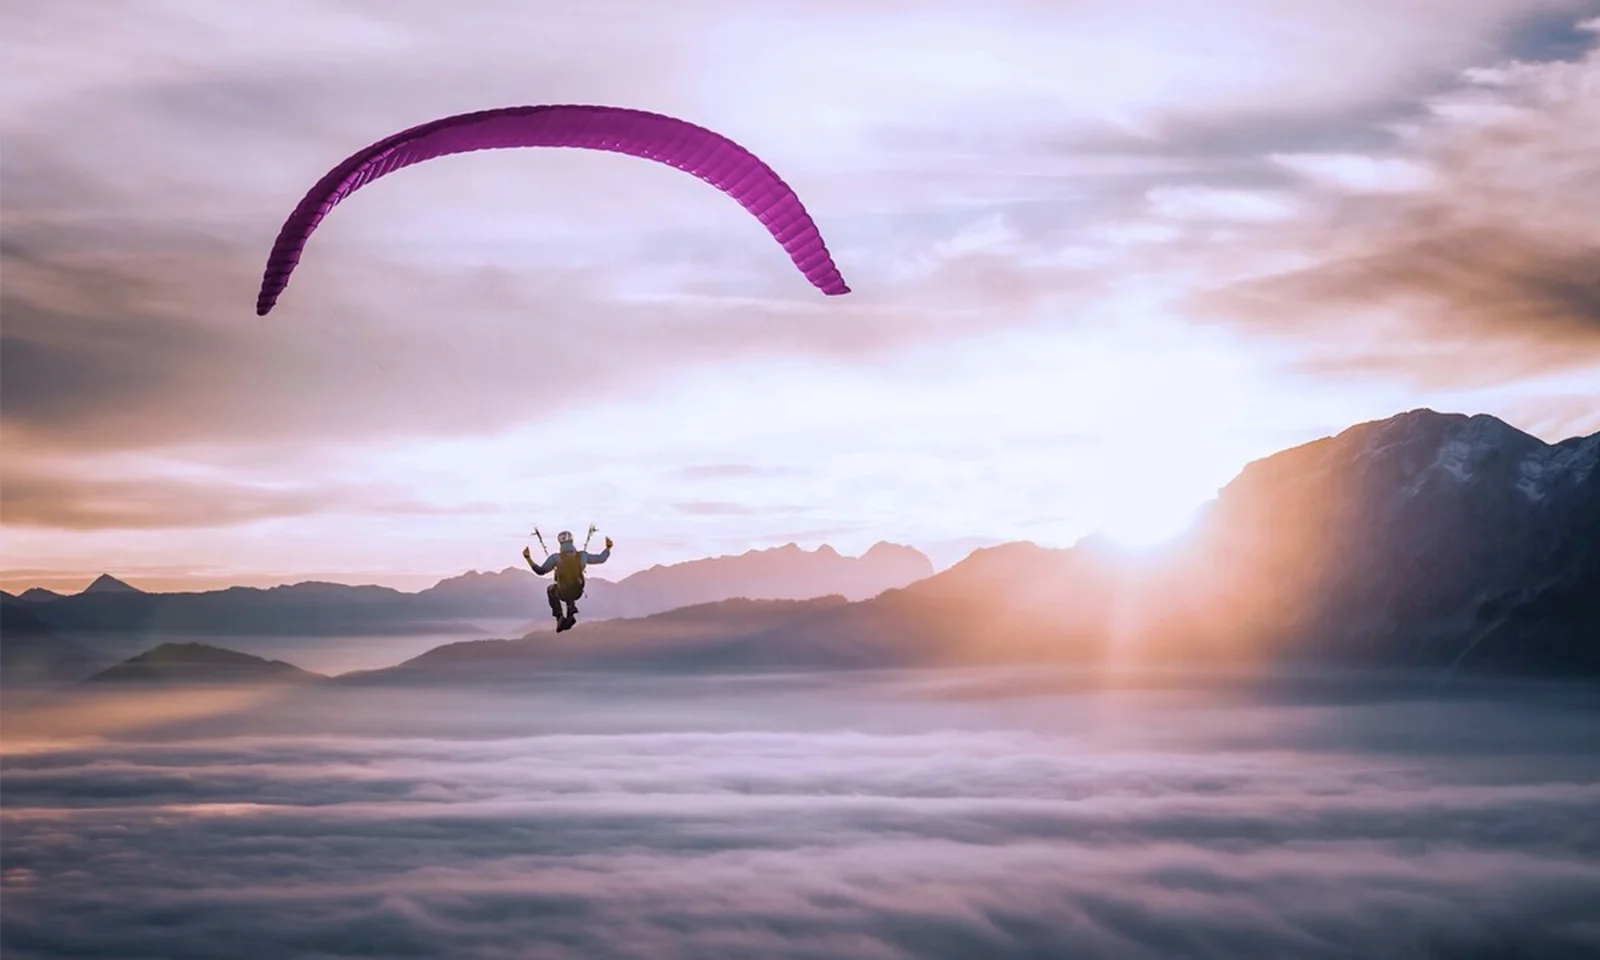 This breathtaking image captures the essence of freedom and adventure as a lone paraglider soars gracefully above a blanket of clouds. The paraglider, with a vibrant purple canopy, is set against the stunning backdrop of a sunrise, casting a warm, golden glow over the scene. The distant mountain peaks rise above the cloud layer, adding depth and a sense of scale to the image. The serene and awe-inspiring atmosphere highlights the beauty of paragliding and the unique perspective it offers on the world. This visual perfectly encapsulates the thrill and tranquillity of flying in the open sky.